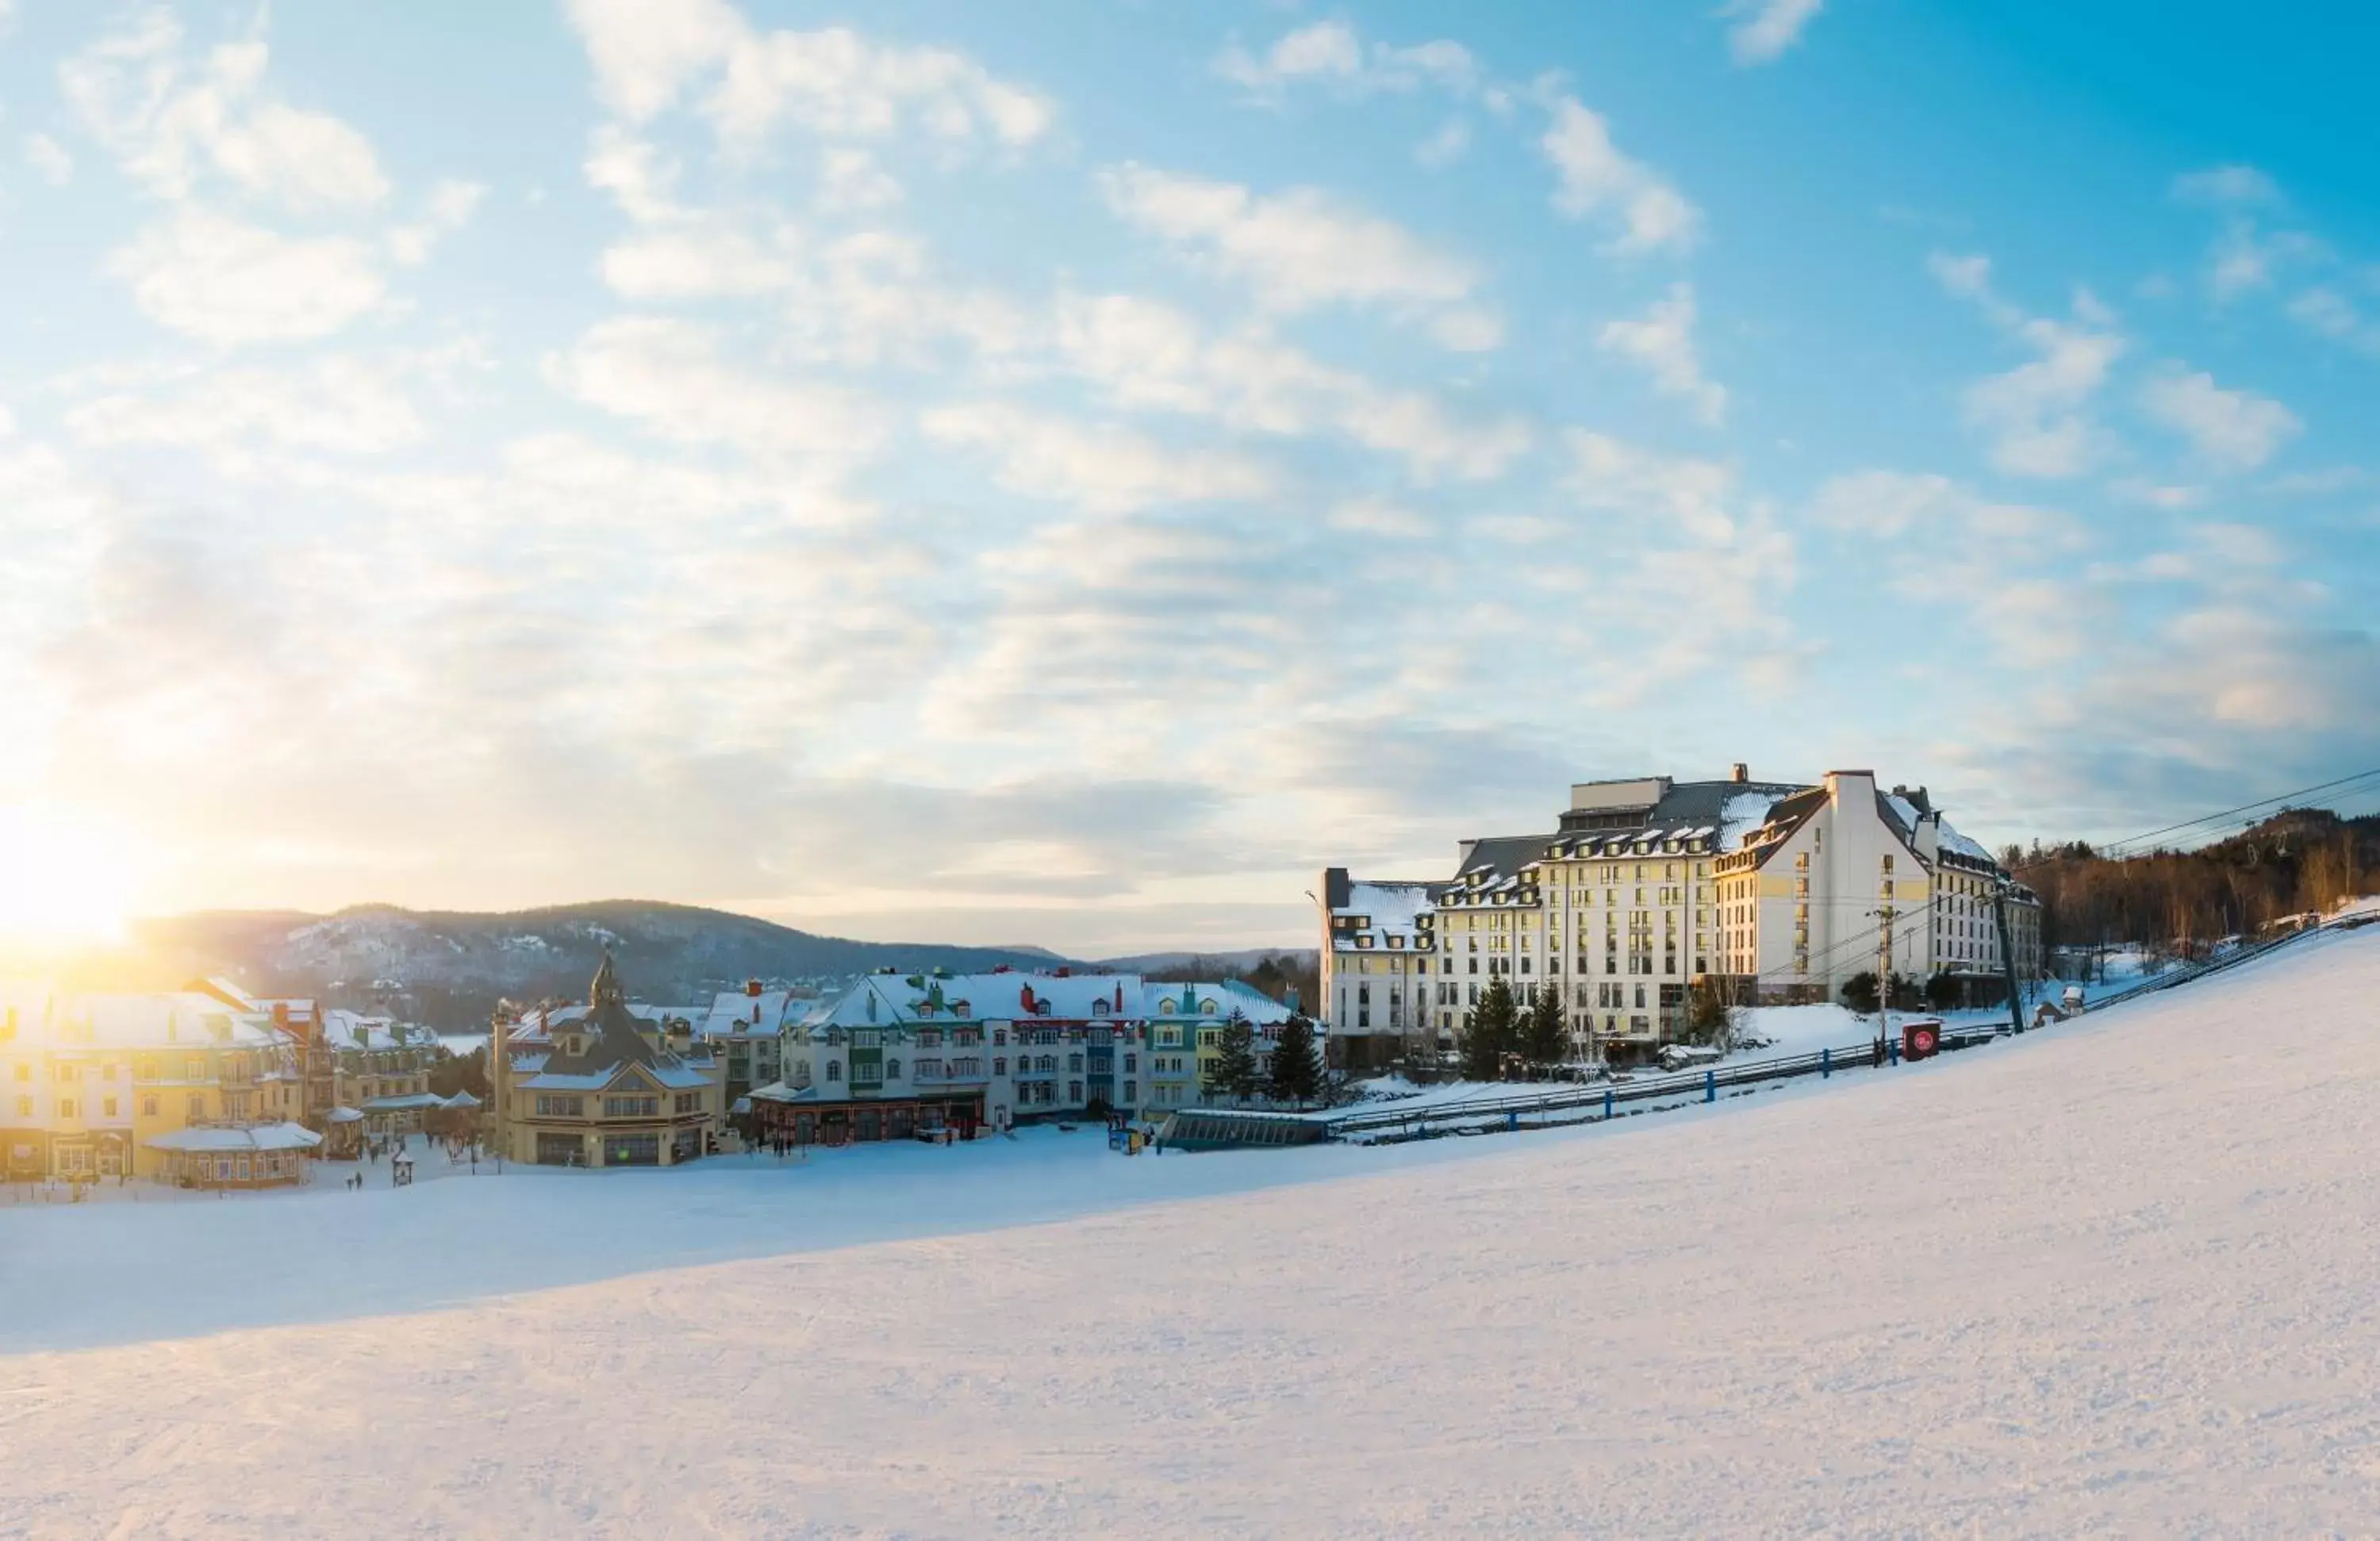 Property building in Fairmont Tremblant